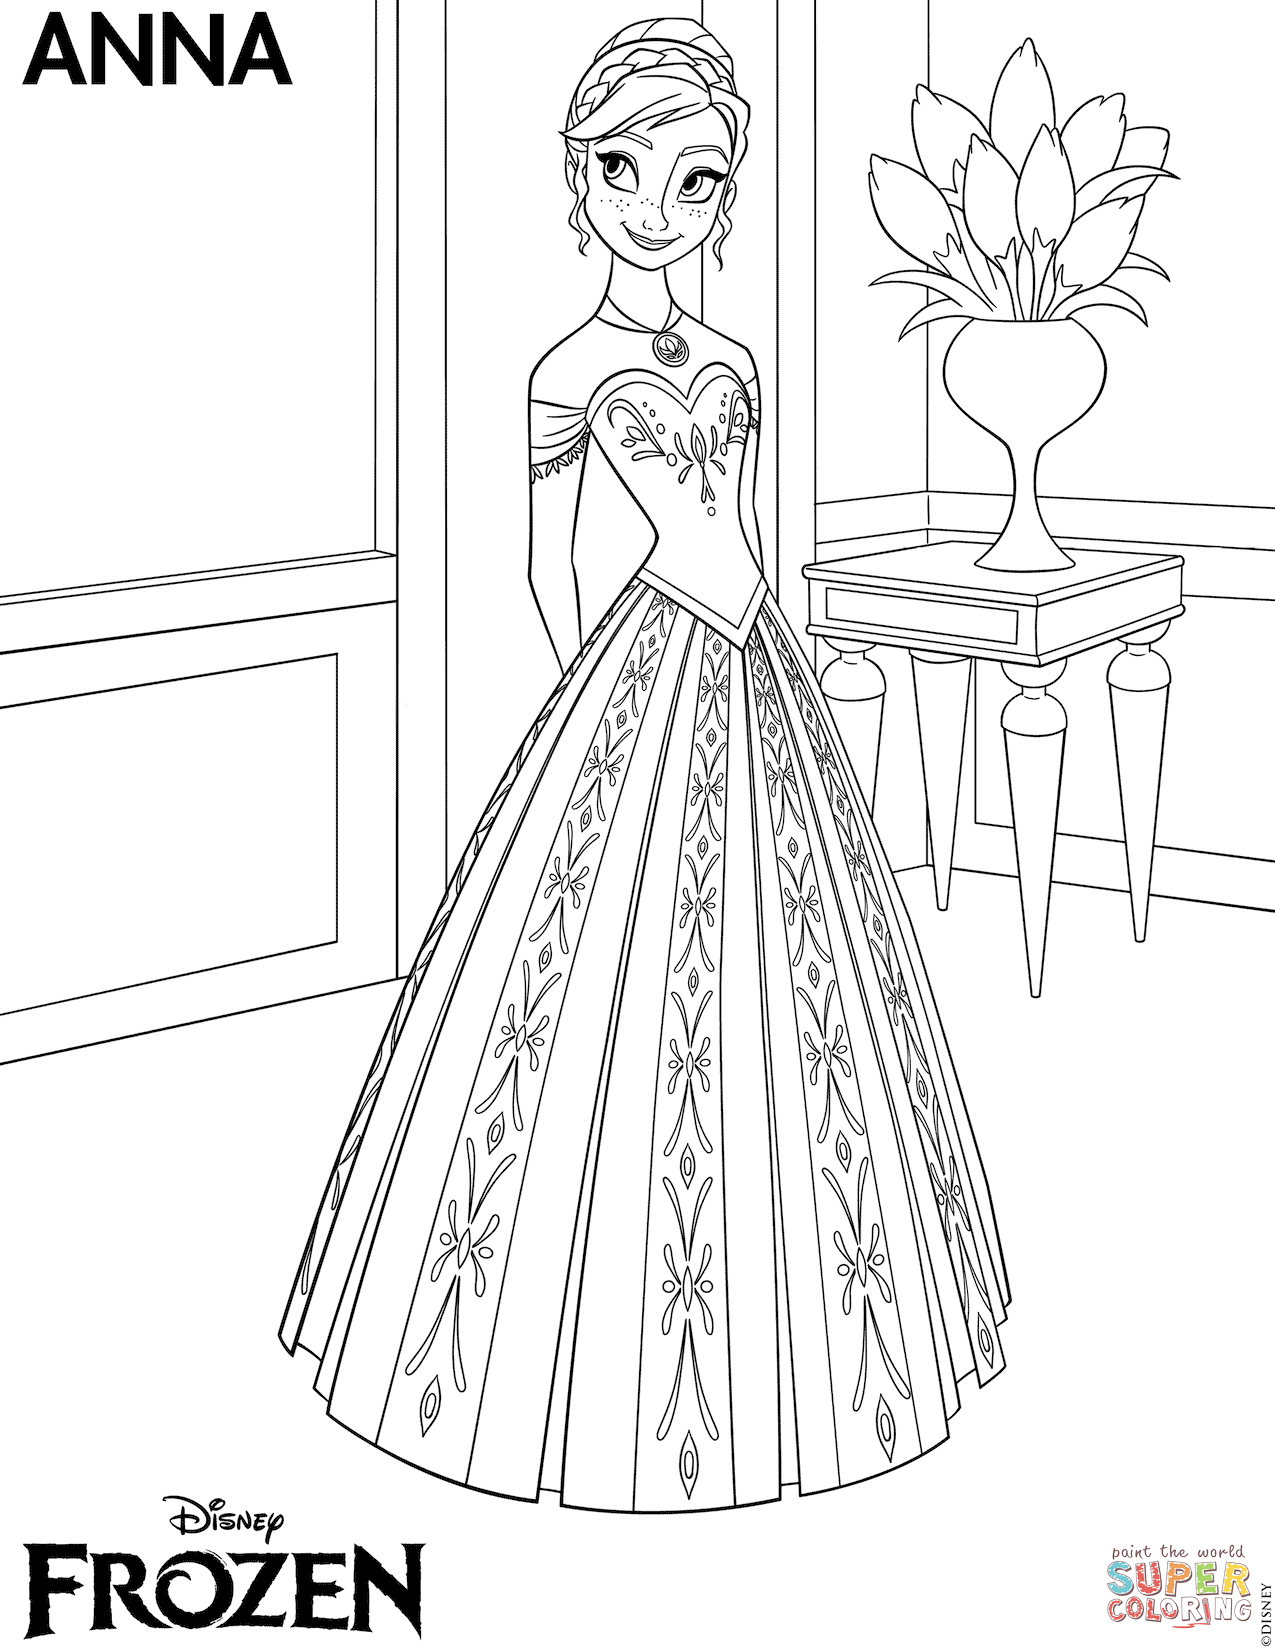 Frozen Anna coloring page | Free Printable Coloring Pages